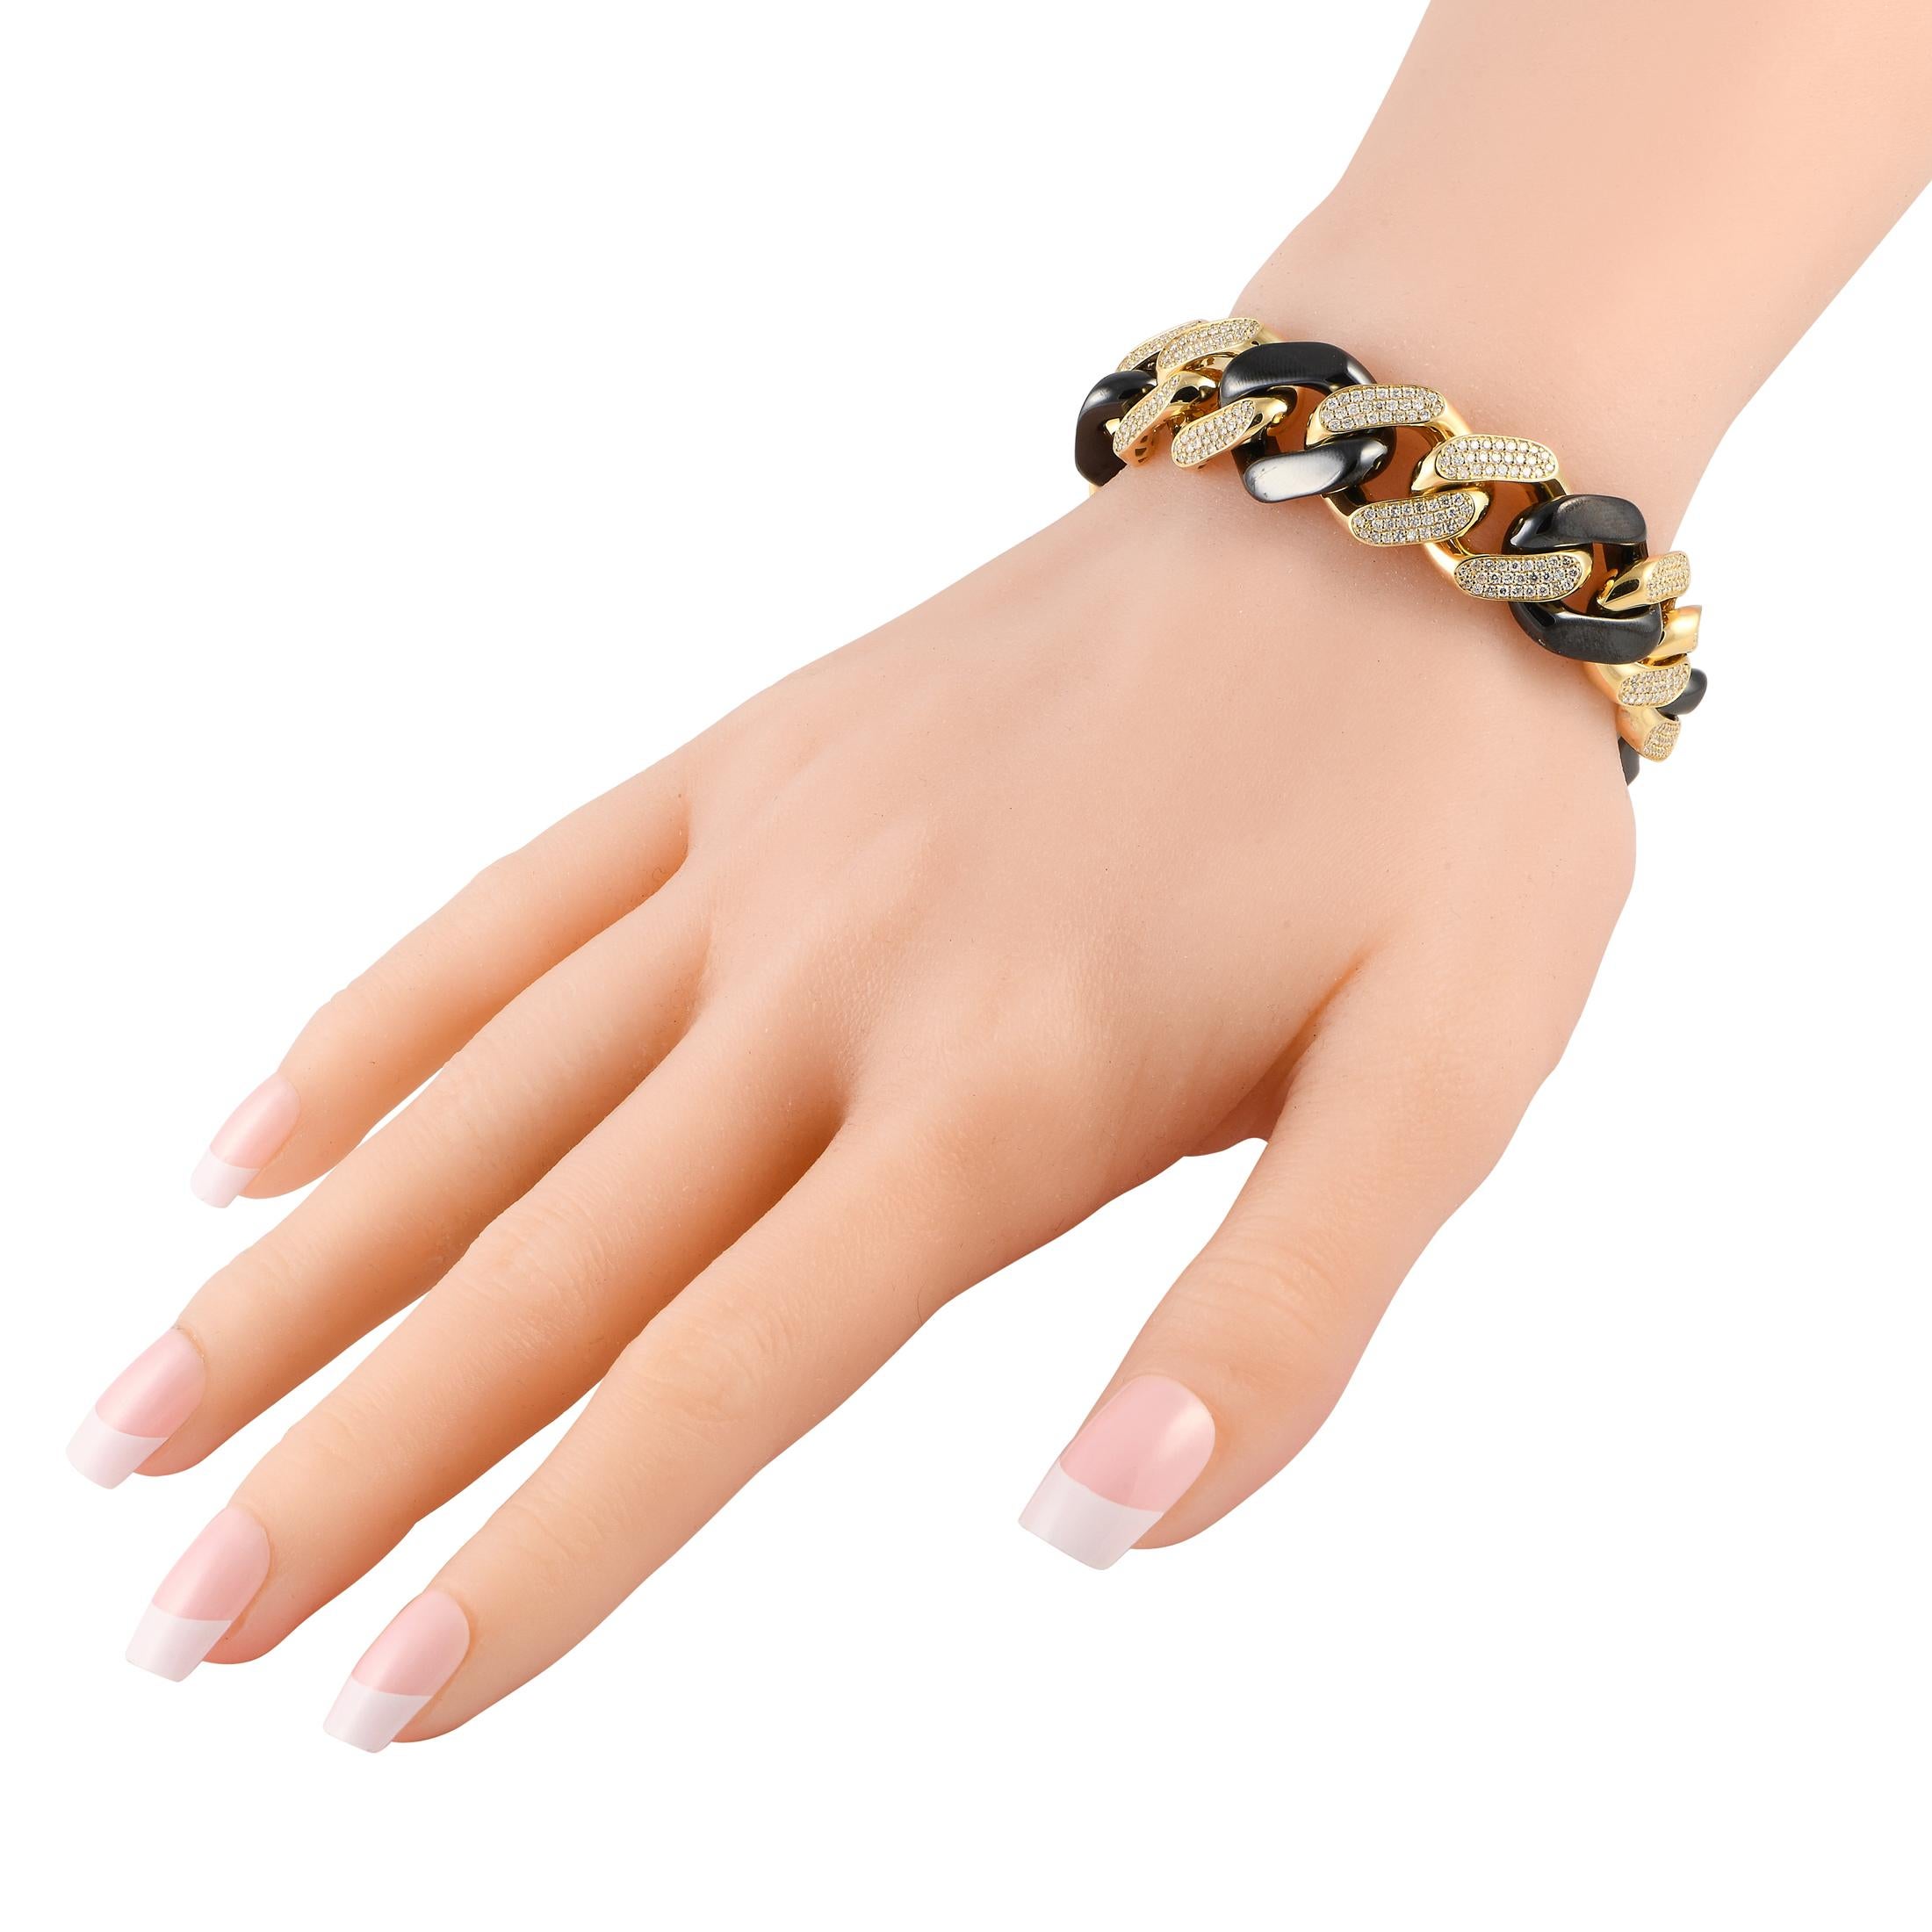 Give depth to your style with this chunky and heavy chain bracelet. It features duos of diamond-paved yellow-gold links interlocking with black-colored chain links. Diamonds totaling 5.00 carats make this bracelet truly impressive. 

This brand new